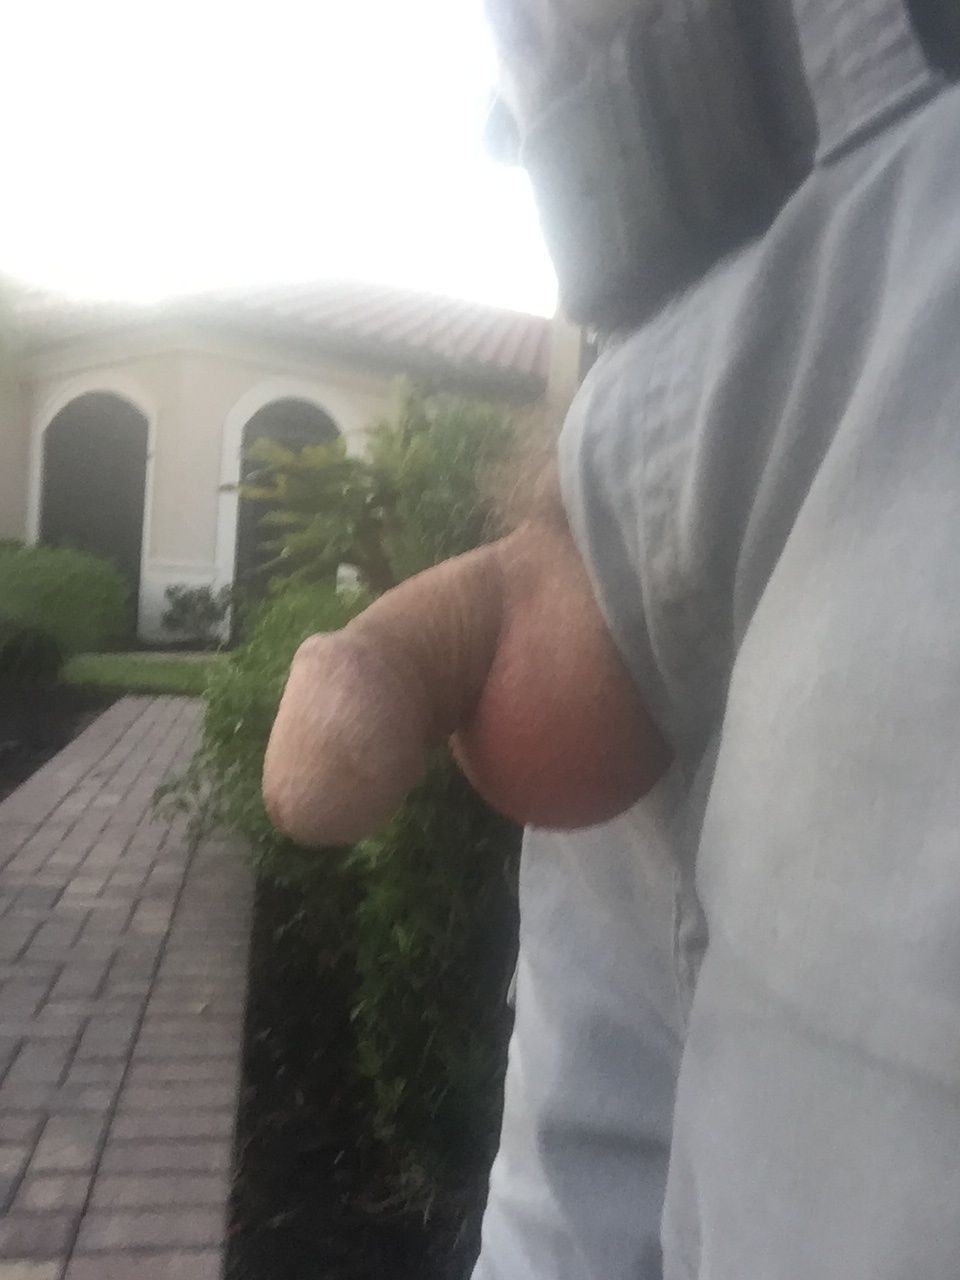 Penis flash for the neighbors #2